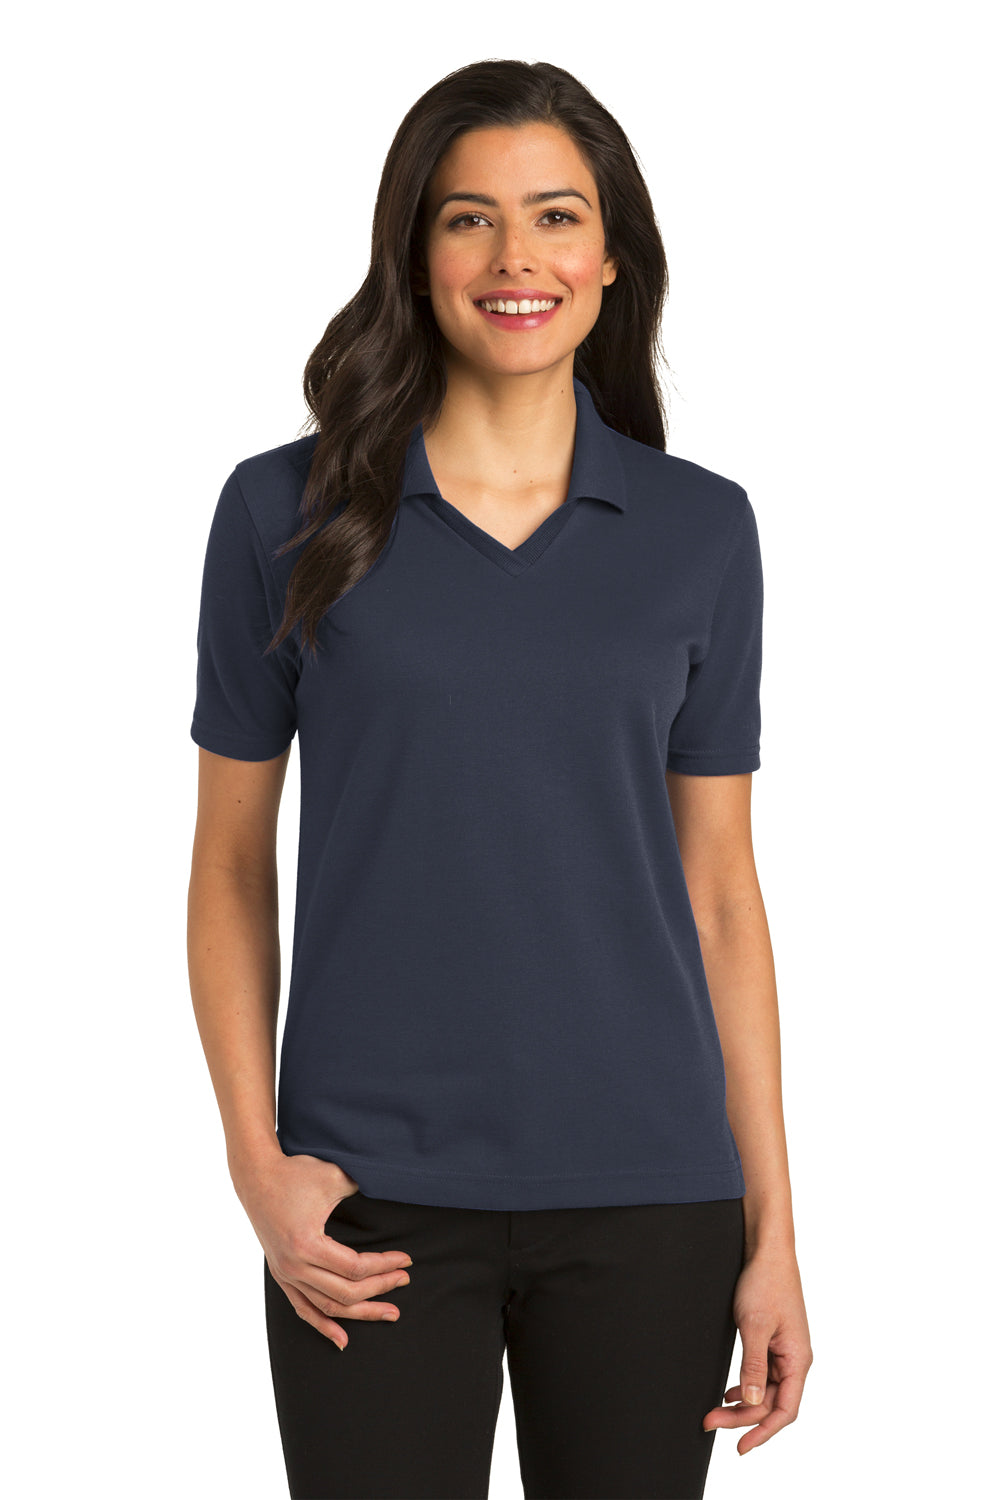 Port Authority L455 Womens Rapid Dry Moisture Wicking Short Sleeve Polo Shirt Navy Blue Front